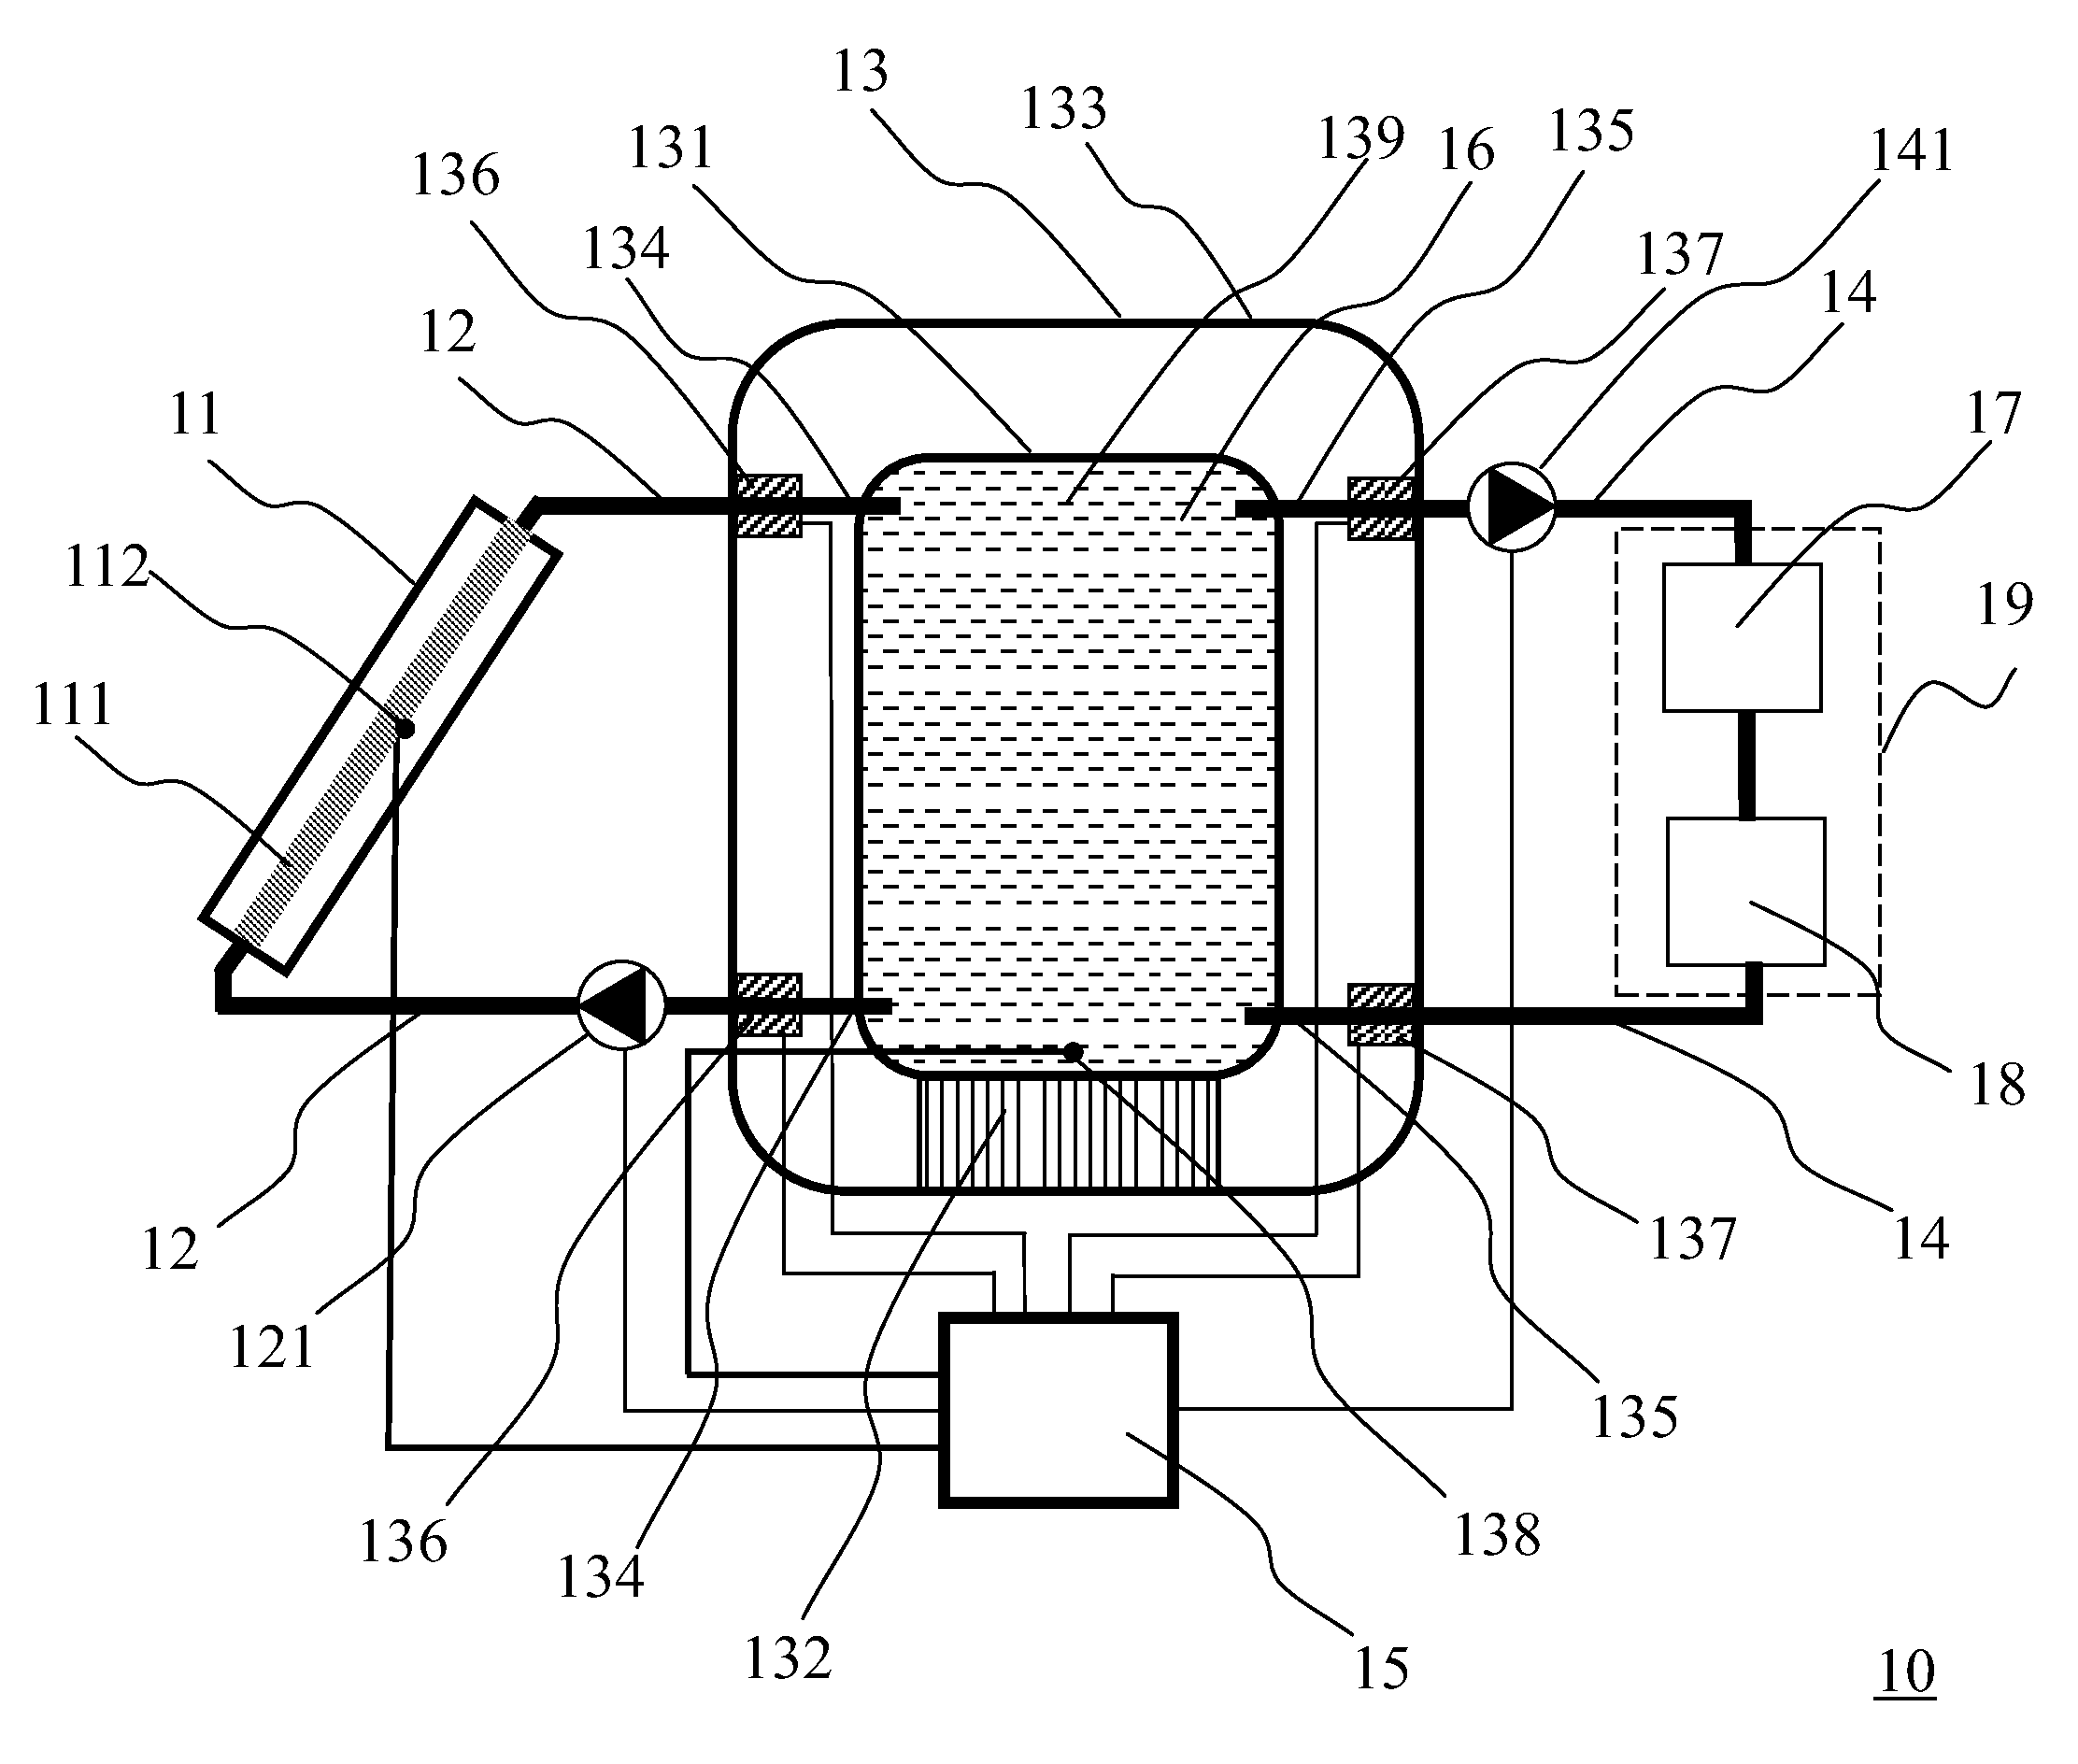 Solar energy collecting and storing system